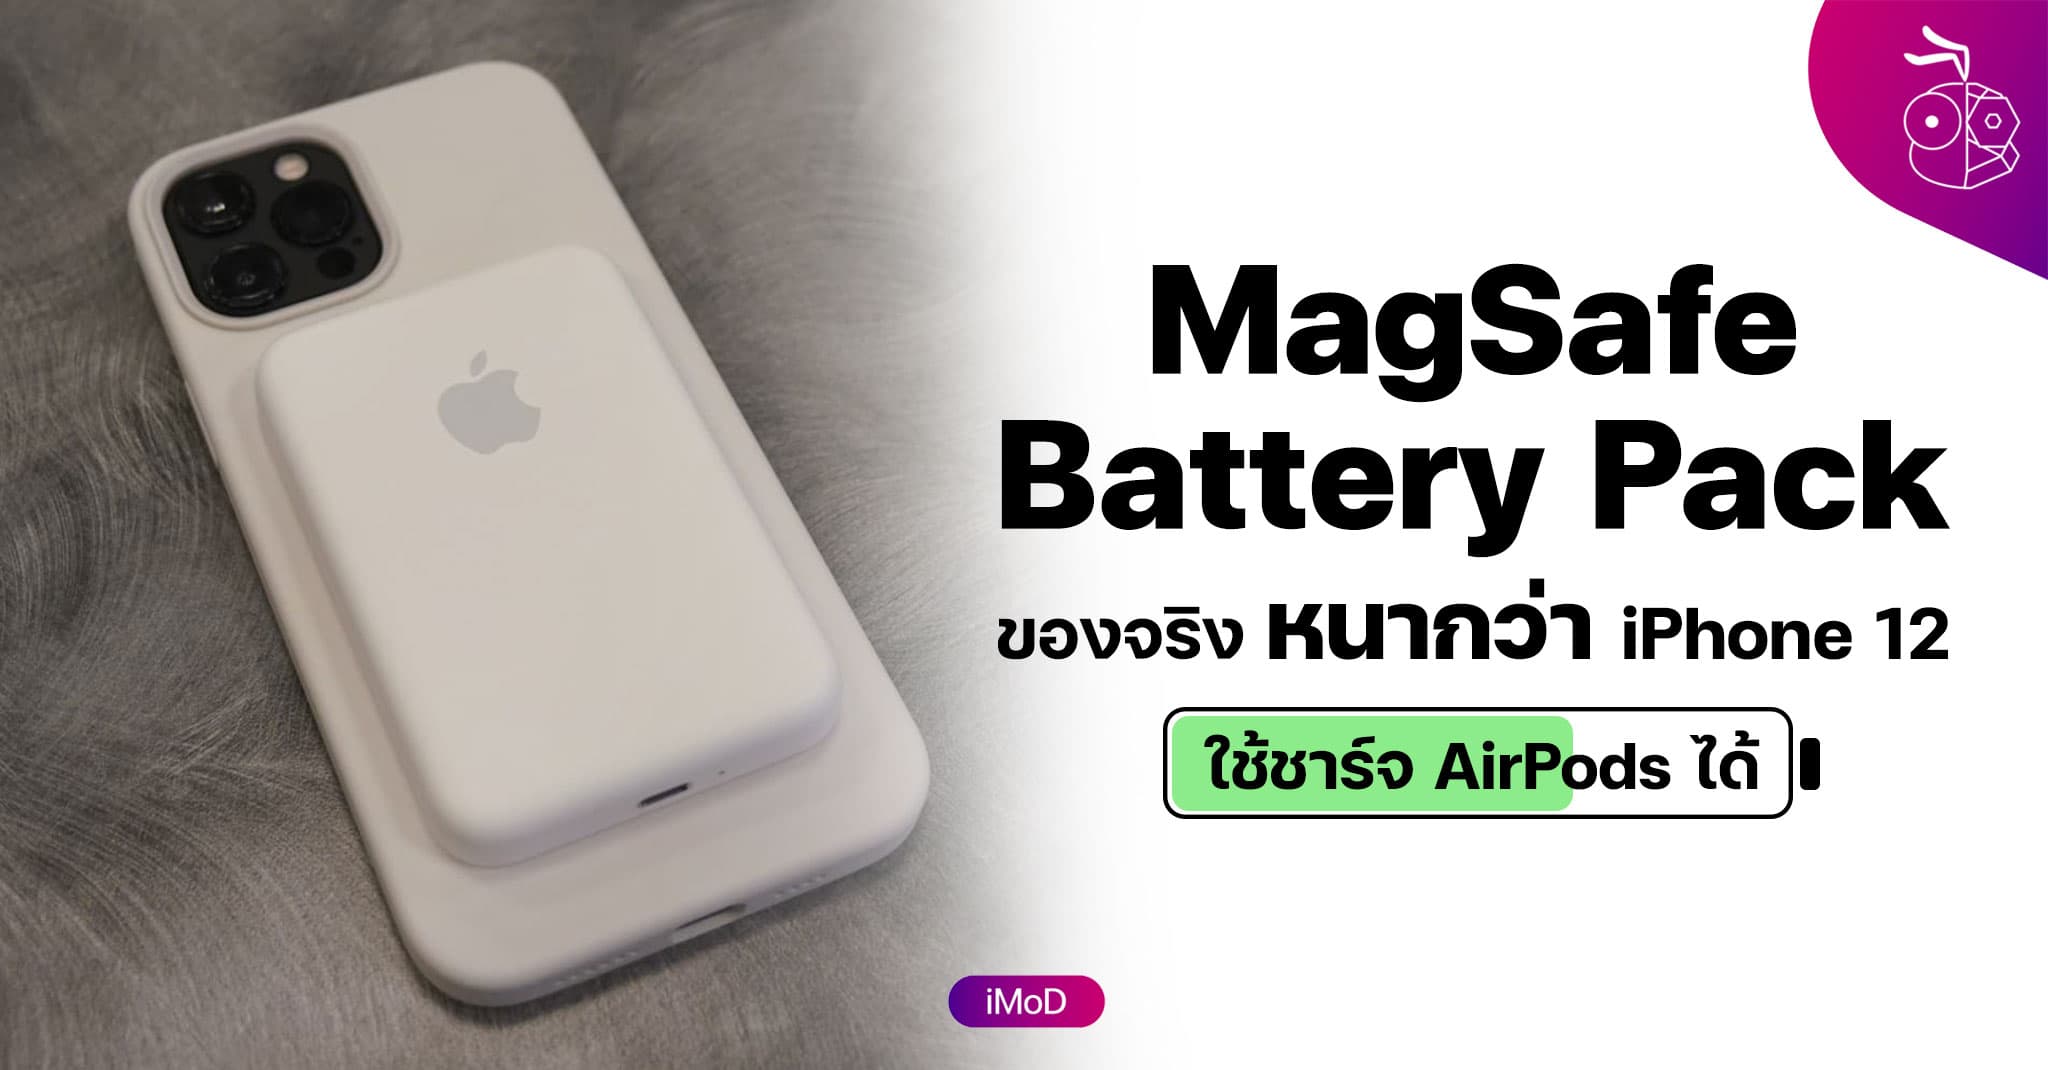 magsafe battery pack qi airpods theverge